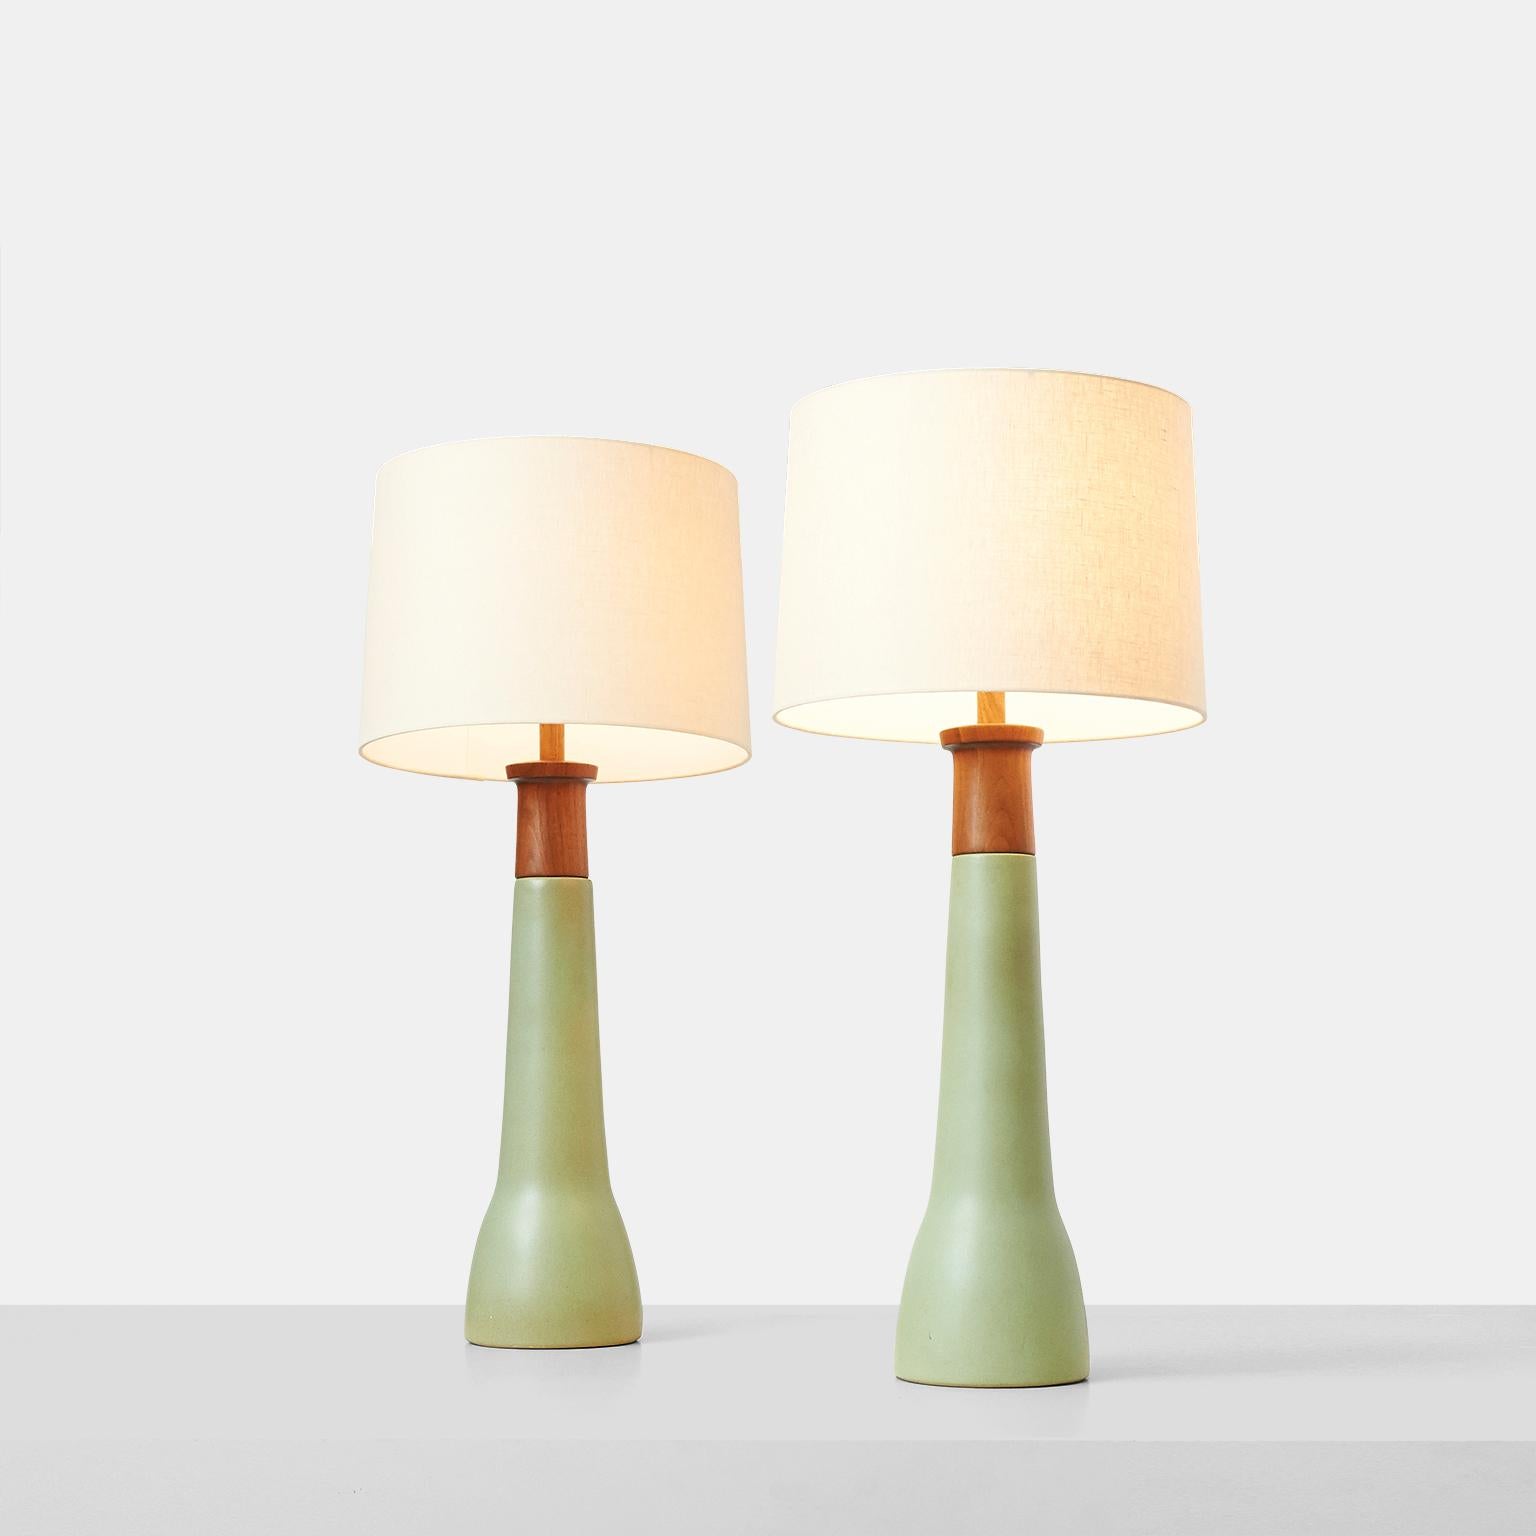 A pair of tall stoneware table lamps by Jane & Gordon Martz. The teak turned wood light fitting is affixed to the matte light green stoneware base. Both lamps include the harp and teak finial. Etched “martz” on the back.

Shades not included. New